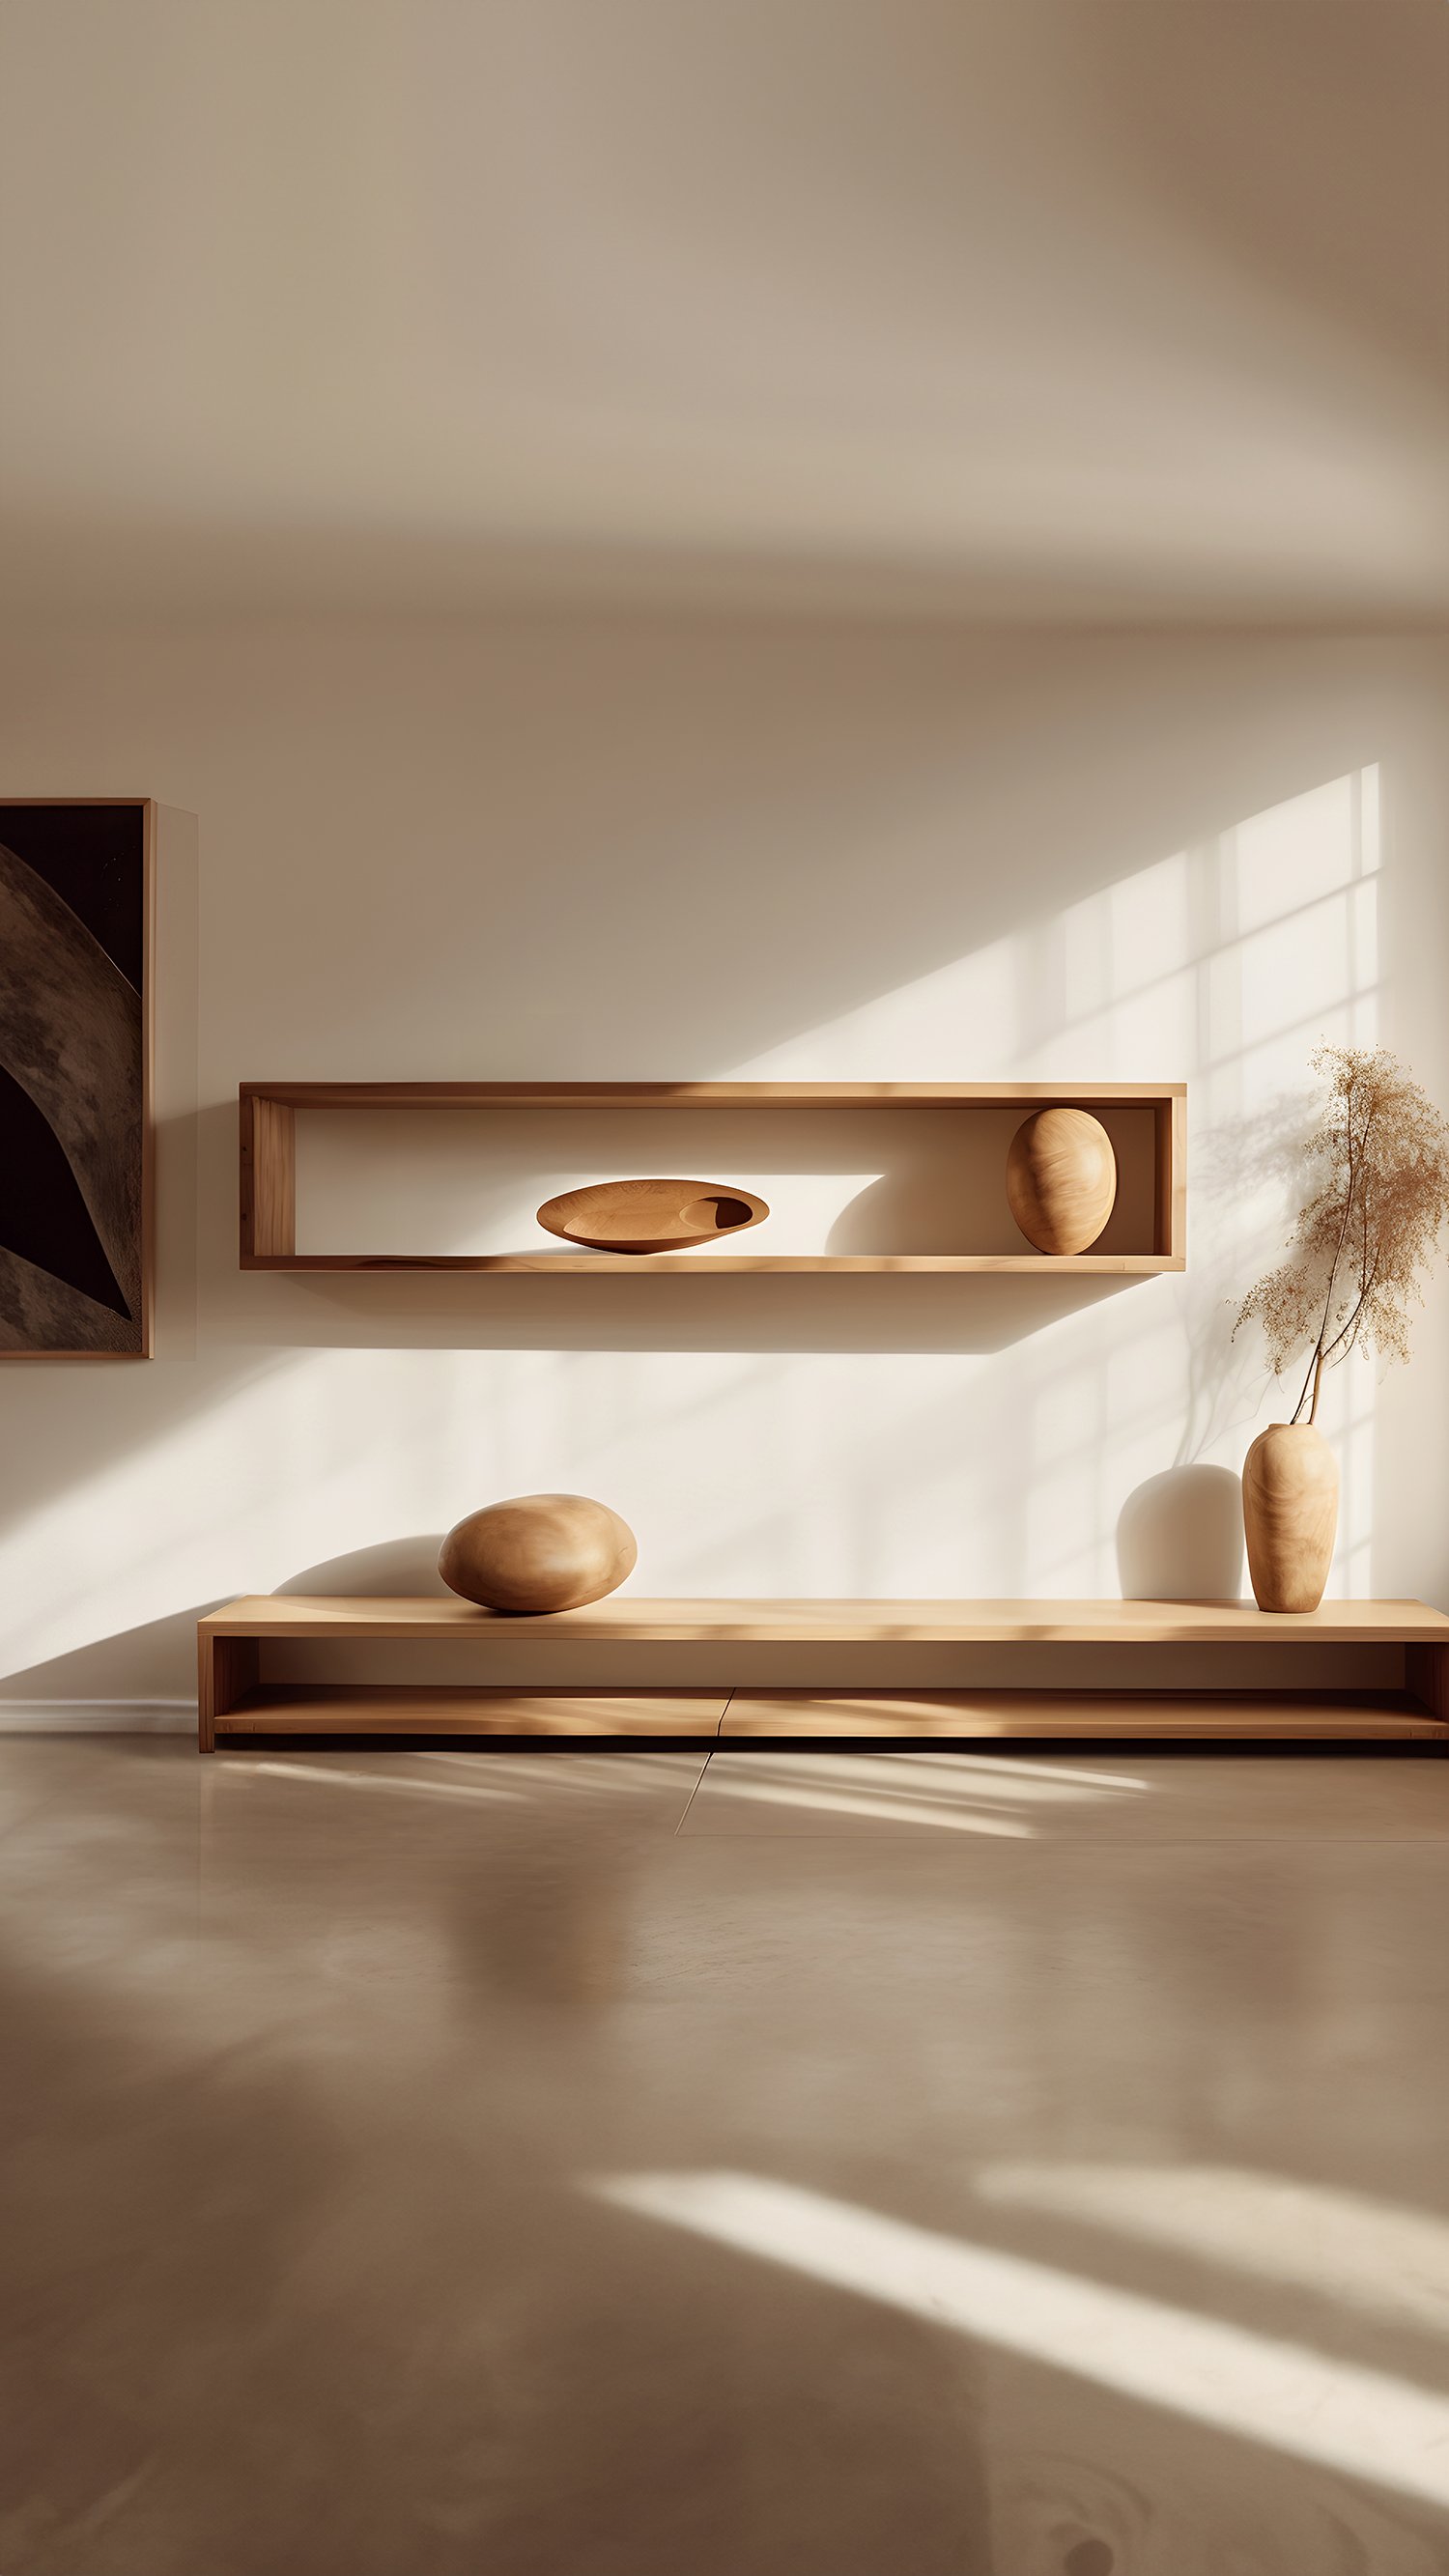 Large Rectangular Floating Shelf with One Sculptural Wooden Pebble Accent, Sereno by Joel Escalon — 2.jpg